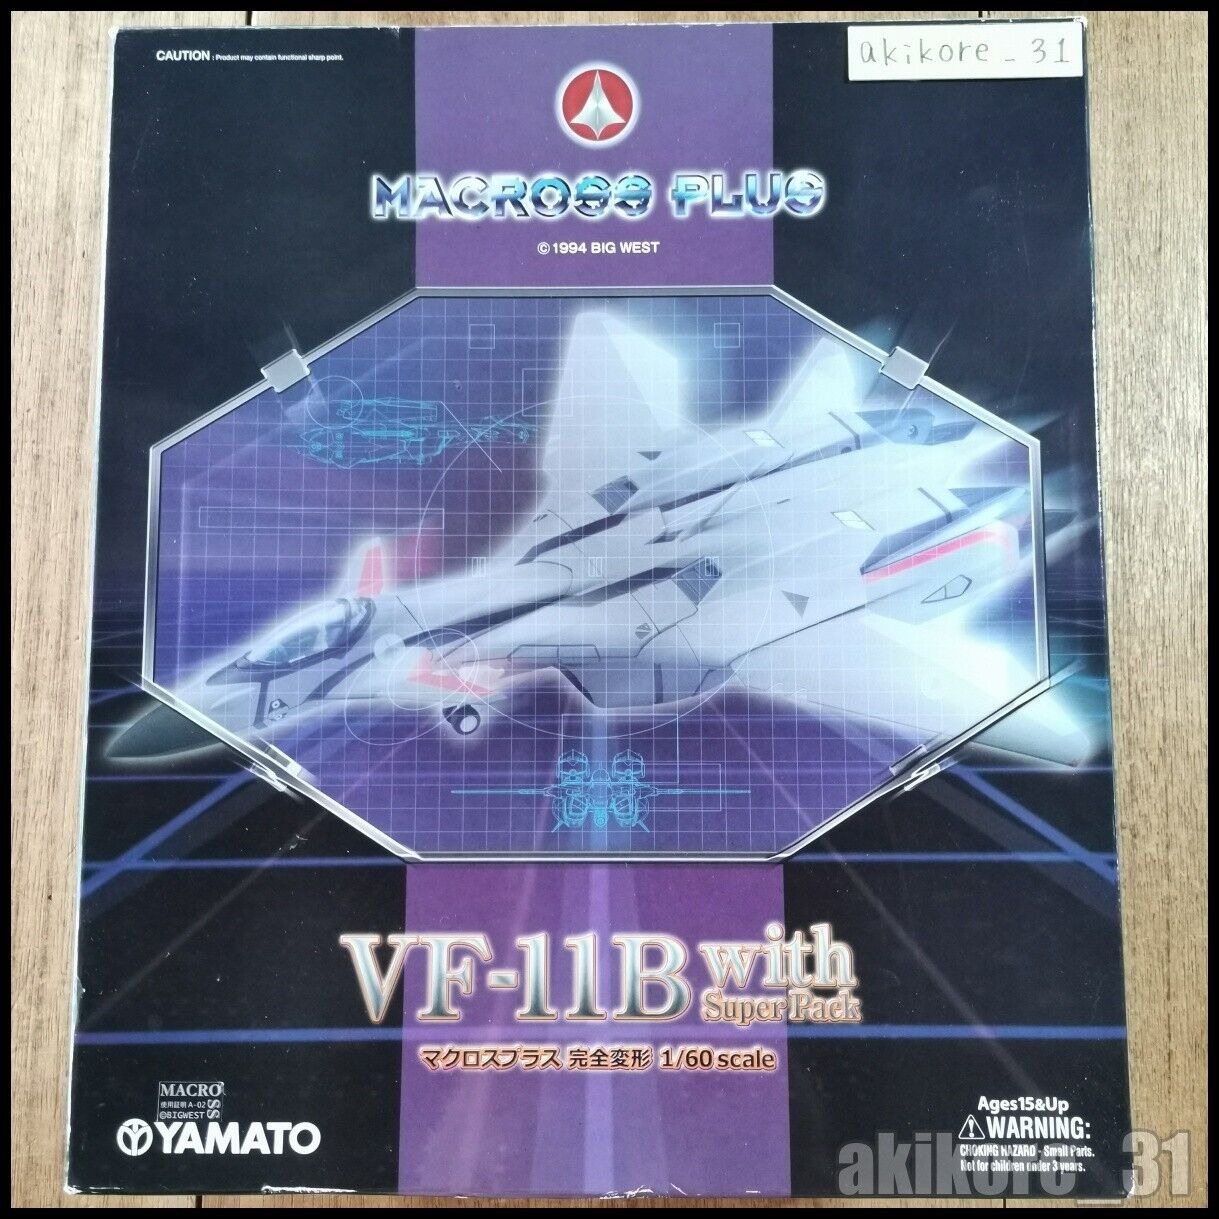 Yamato 1/60 Scale Perfect Trans Macross PLUS vf-11b with Super Pack